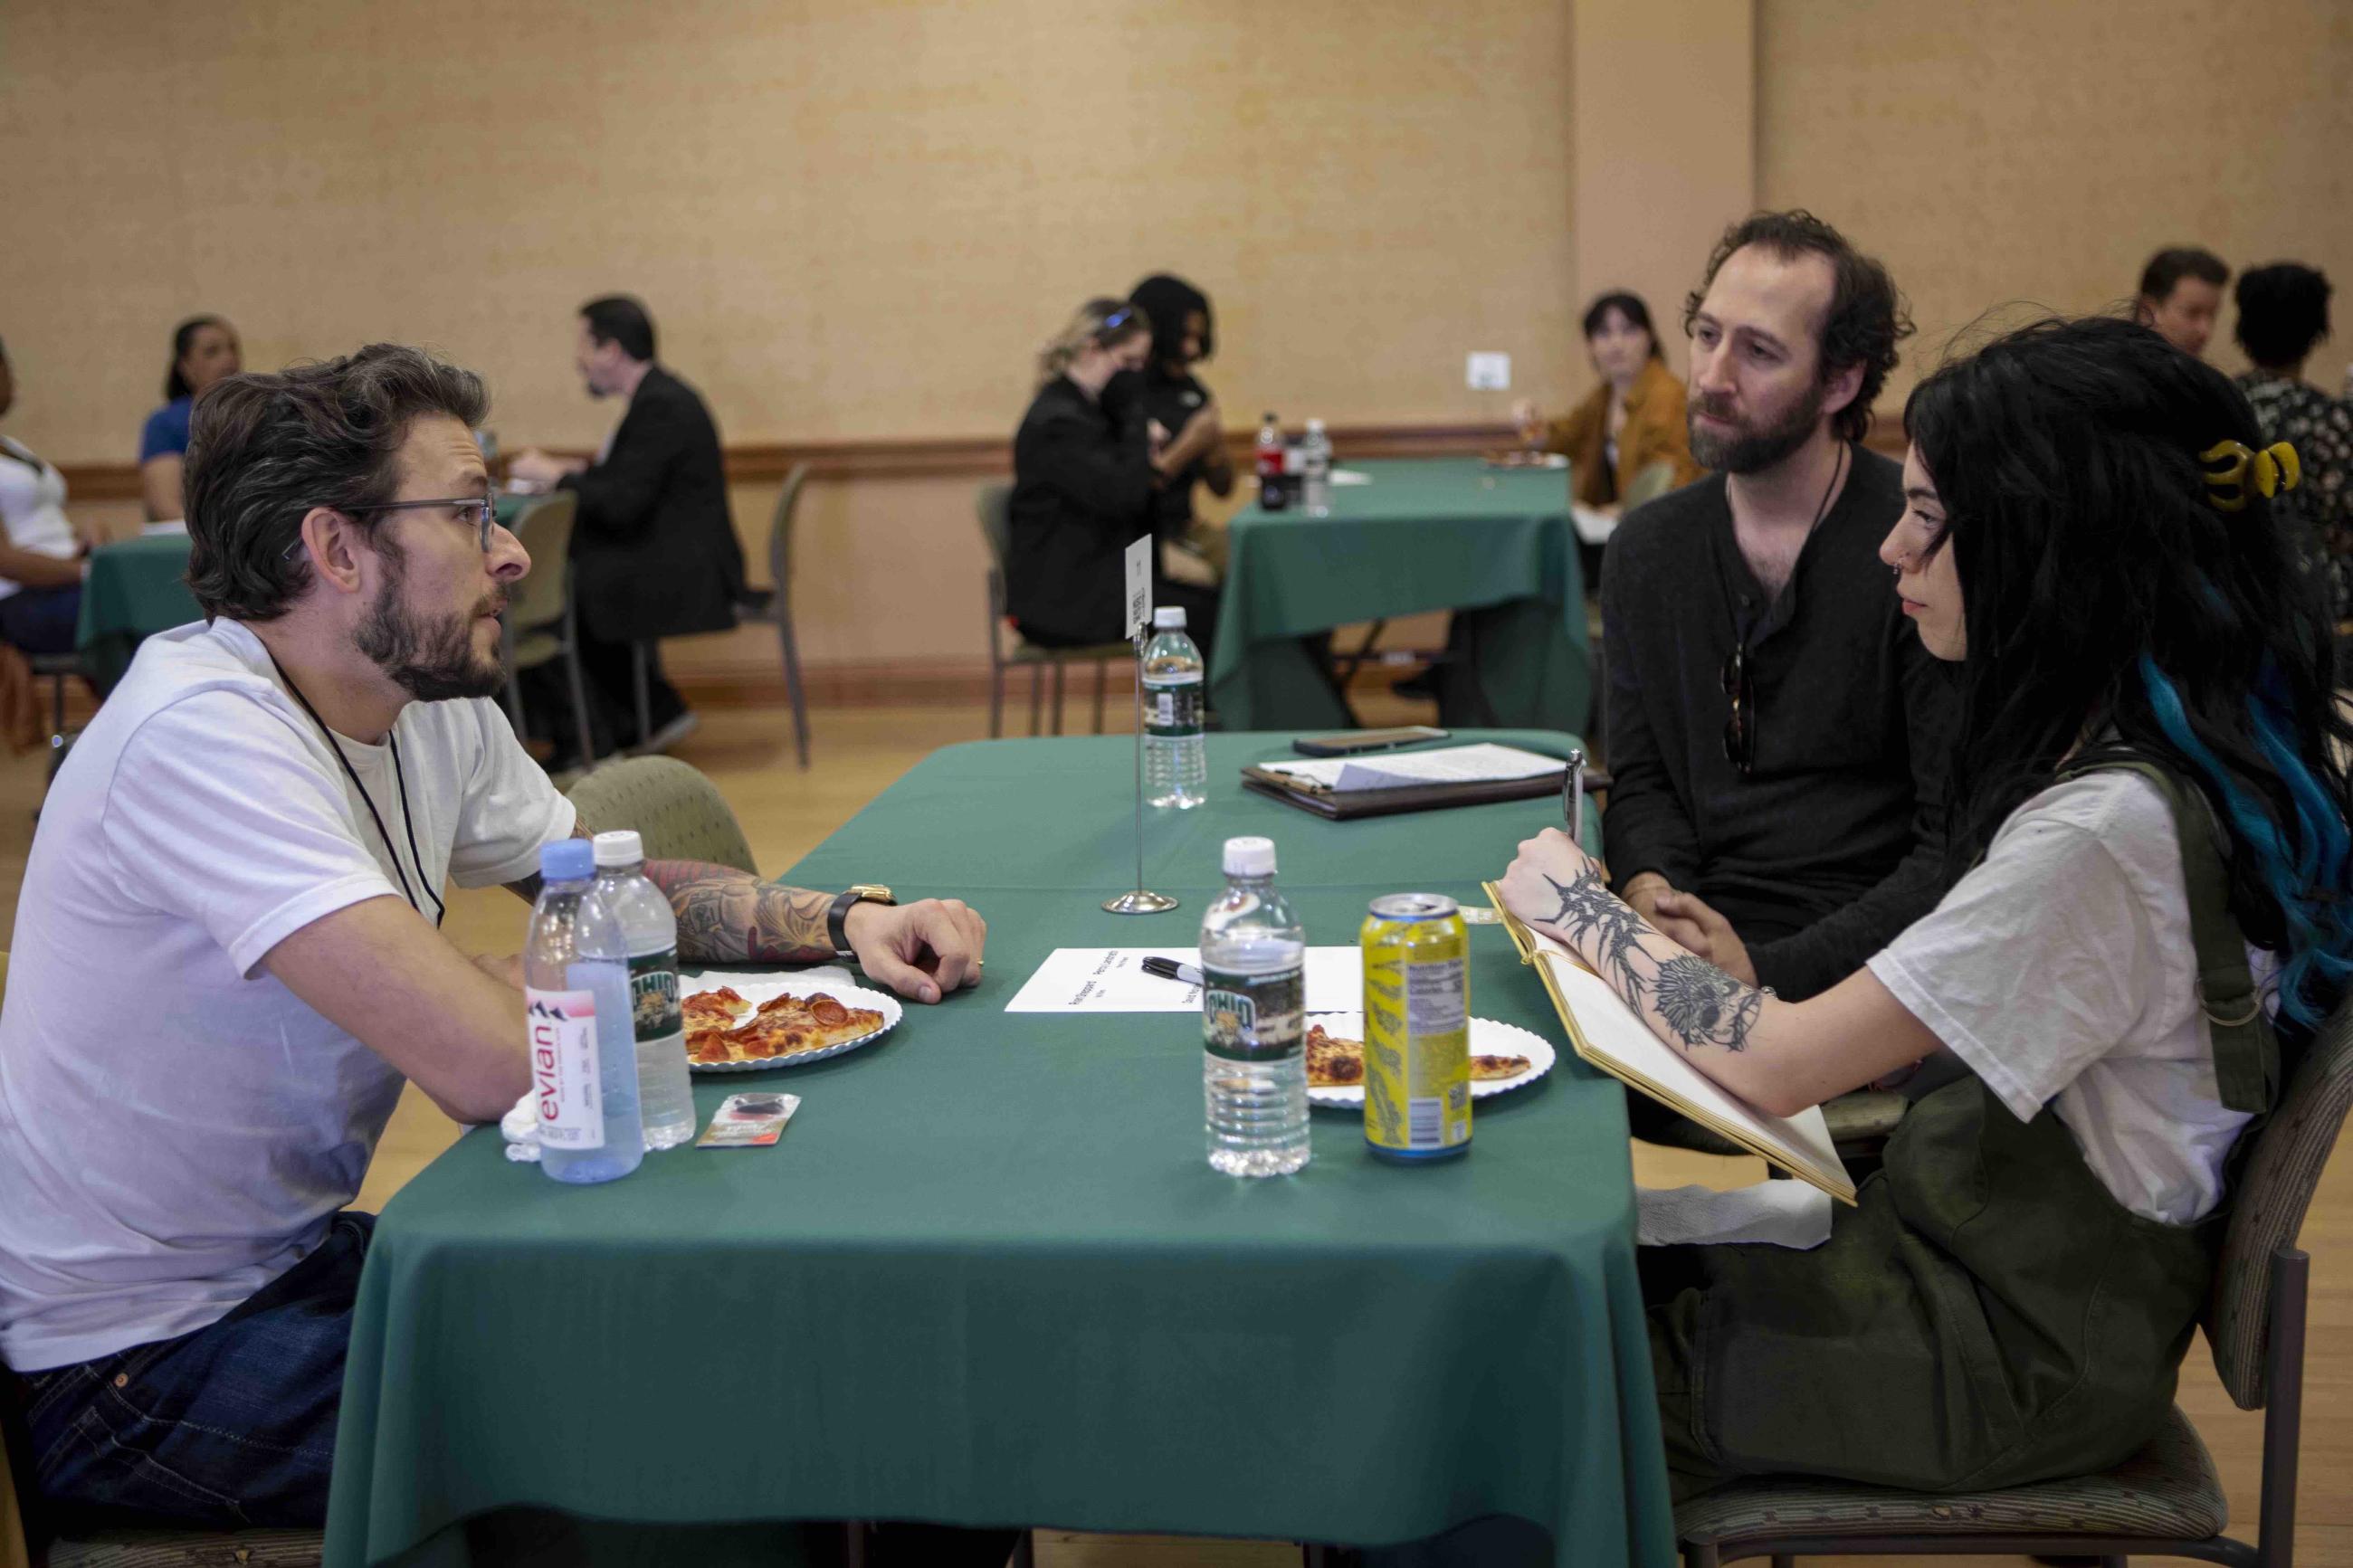 Chris Messina talking to two individuals at a table